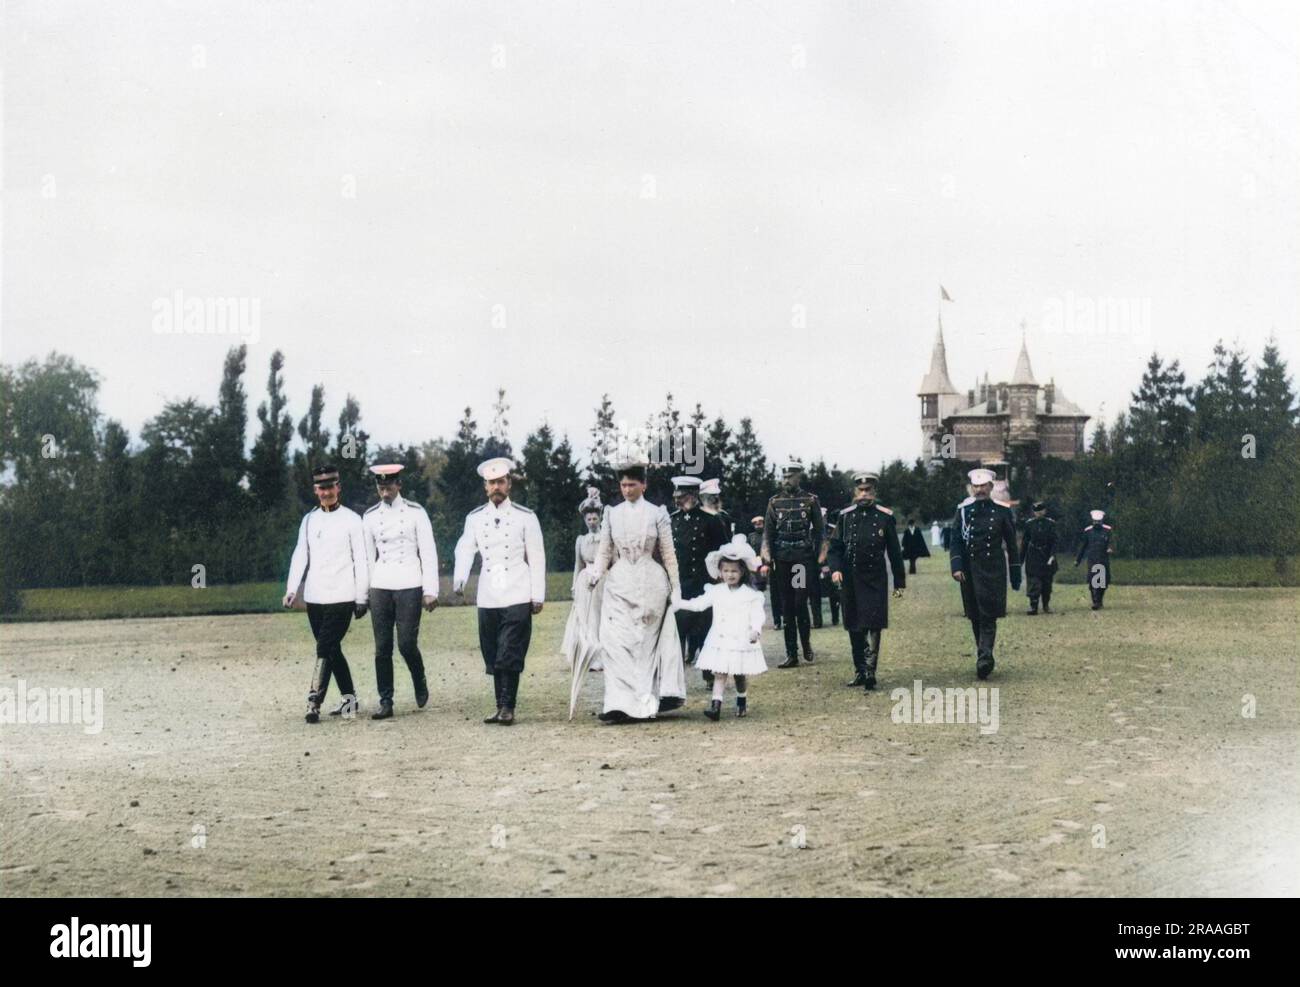 Tsar Nicholas II of Russia walking through the countryside at Krasnoe Selo among a large entourage that includes his wife Alexandra Feodorovna, one of his daughters, other family members and several officials.     Date: circa 1901 Stock Photo